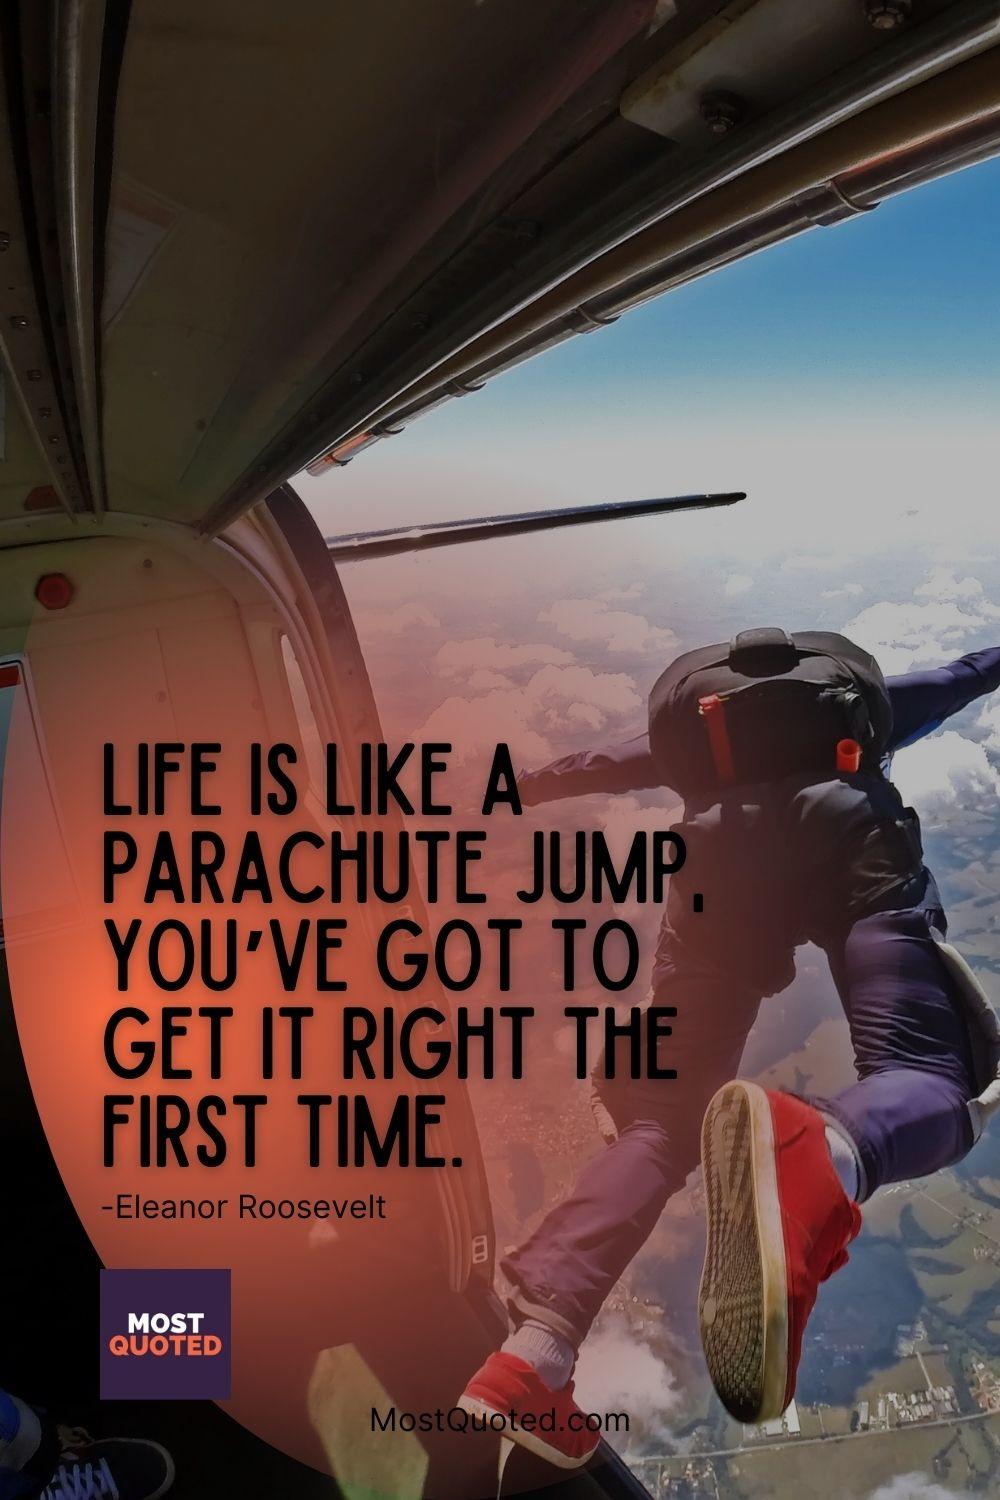 Life is like a parachute jump, you’ve got to get it right the first time. - Eleanor Roosevelt